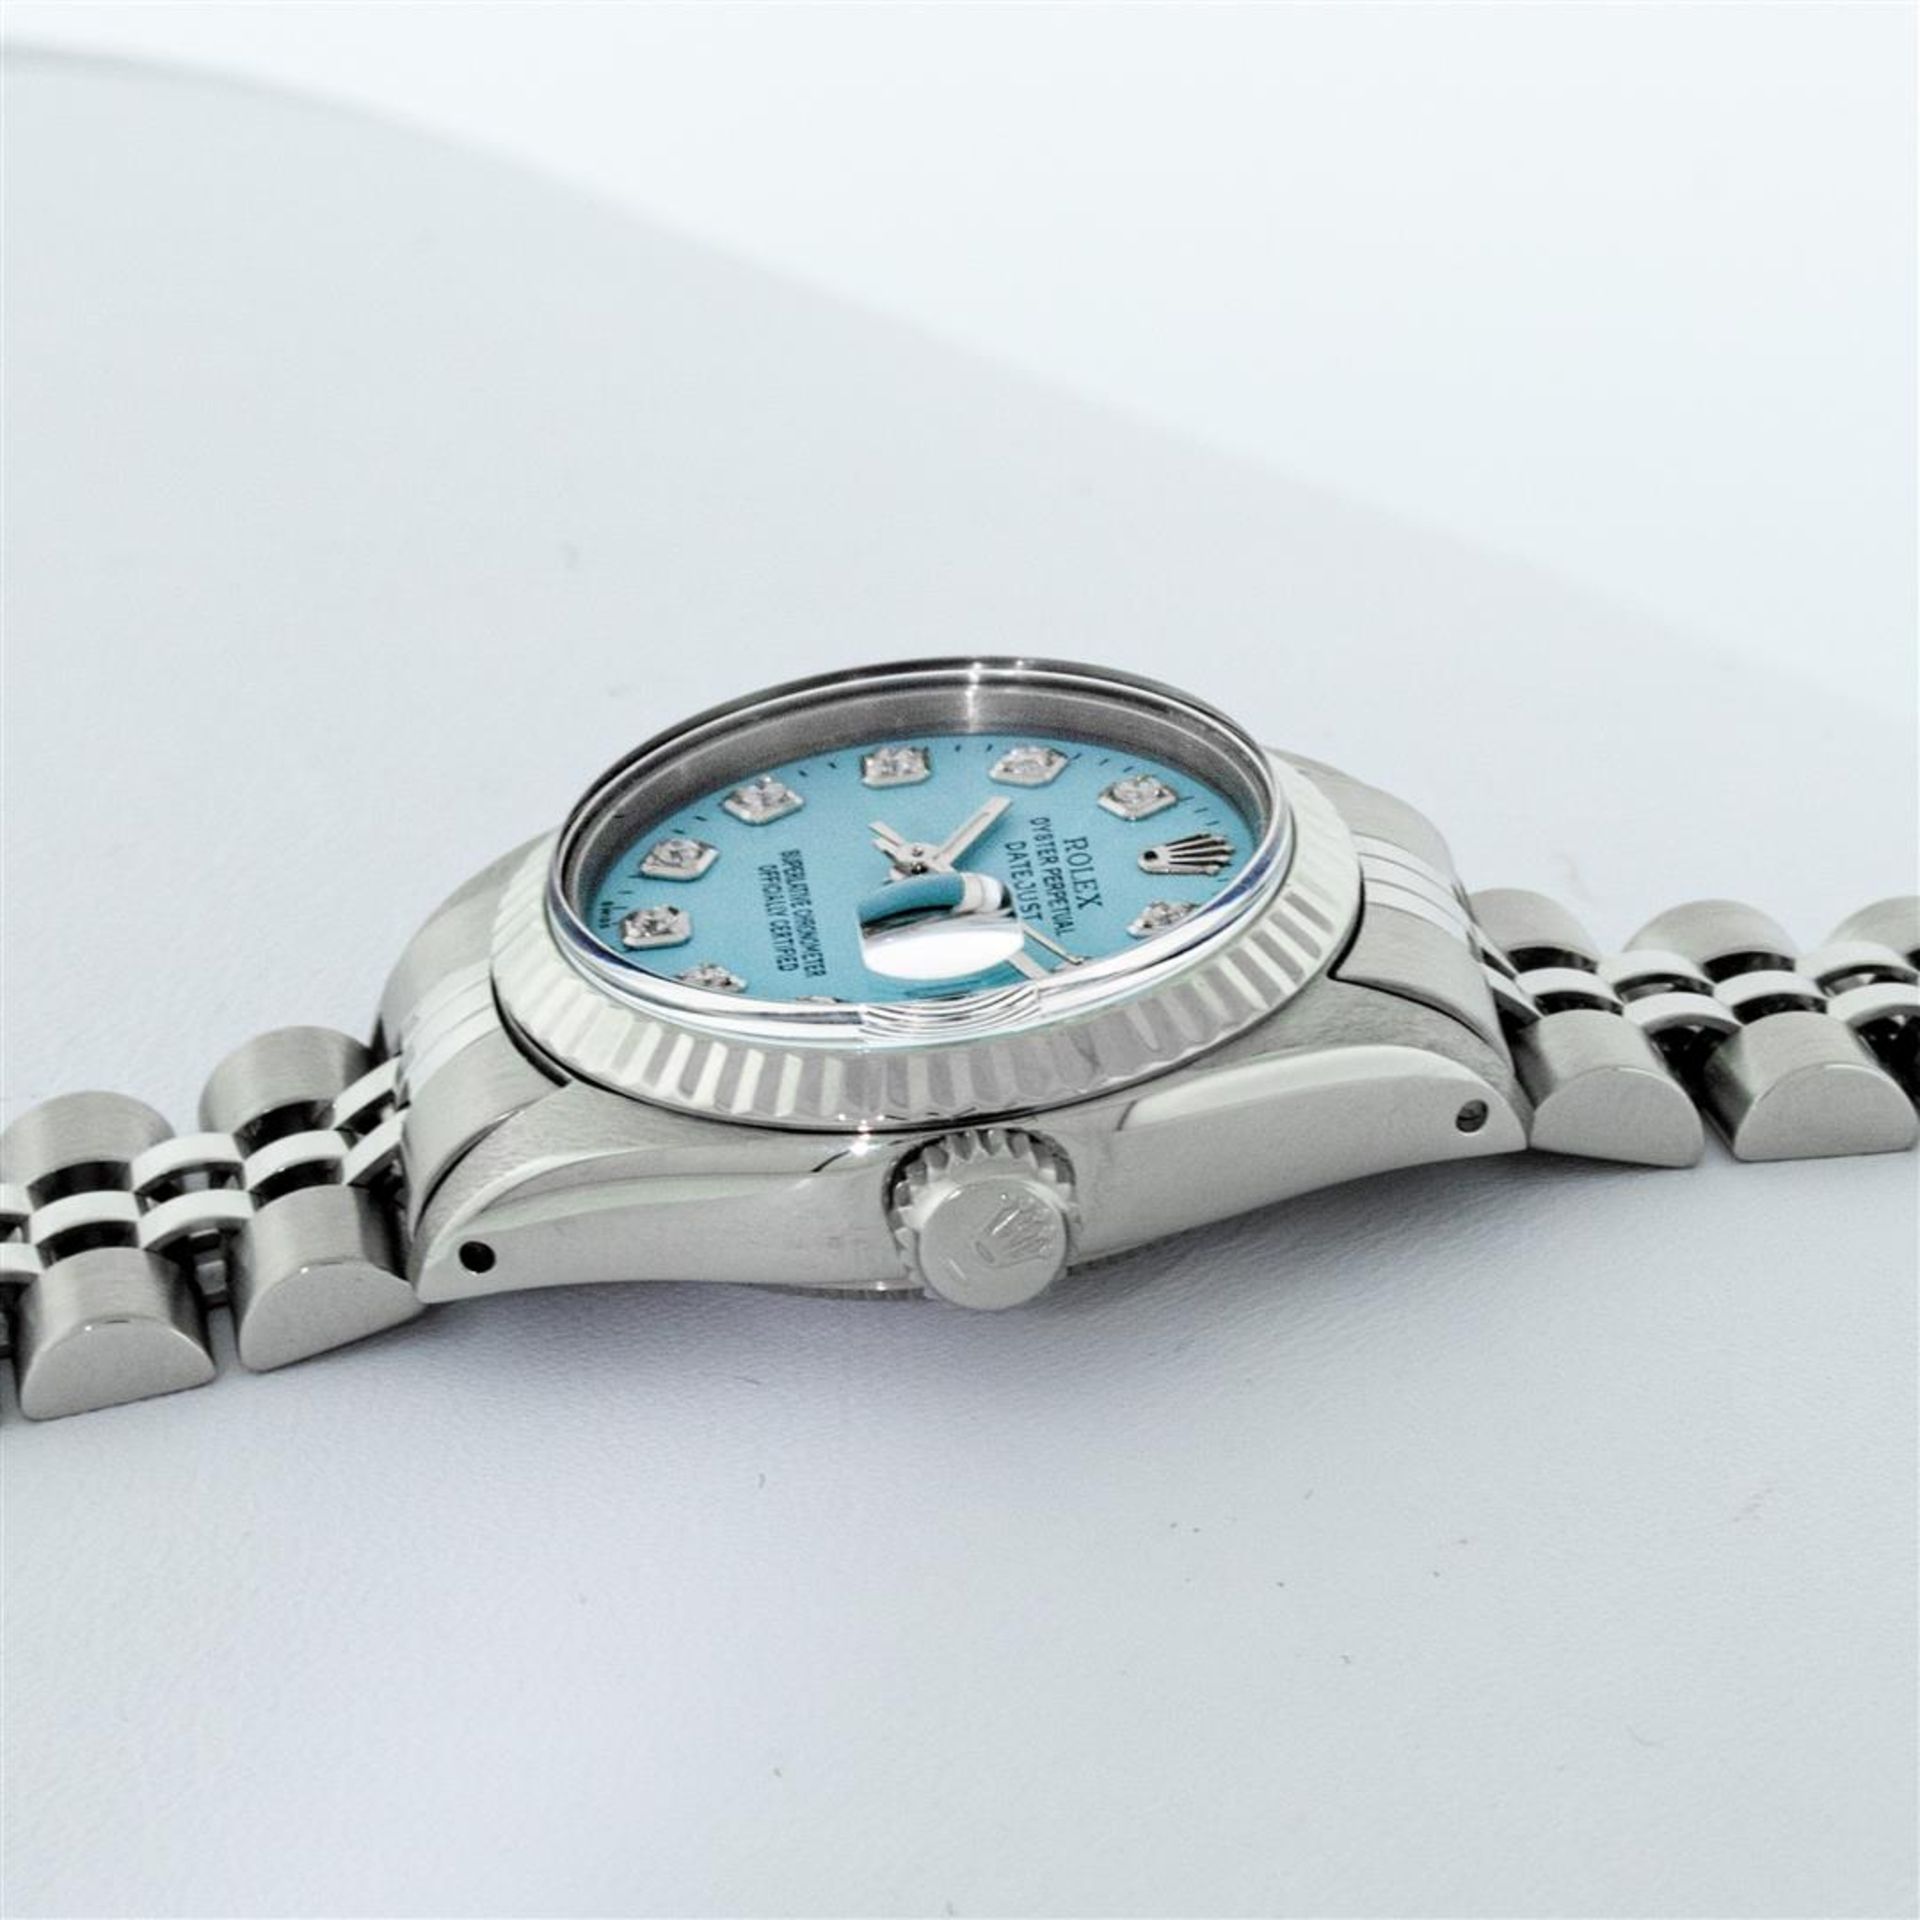 Rolex Ladies Stainless Steel Ice Blue Diamond 26MM Datejust Wristwatch Serviced - Image 6 of 9